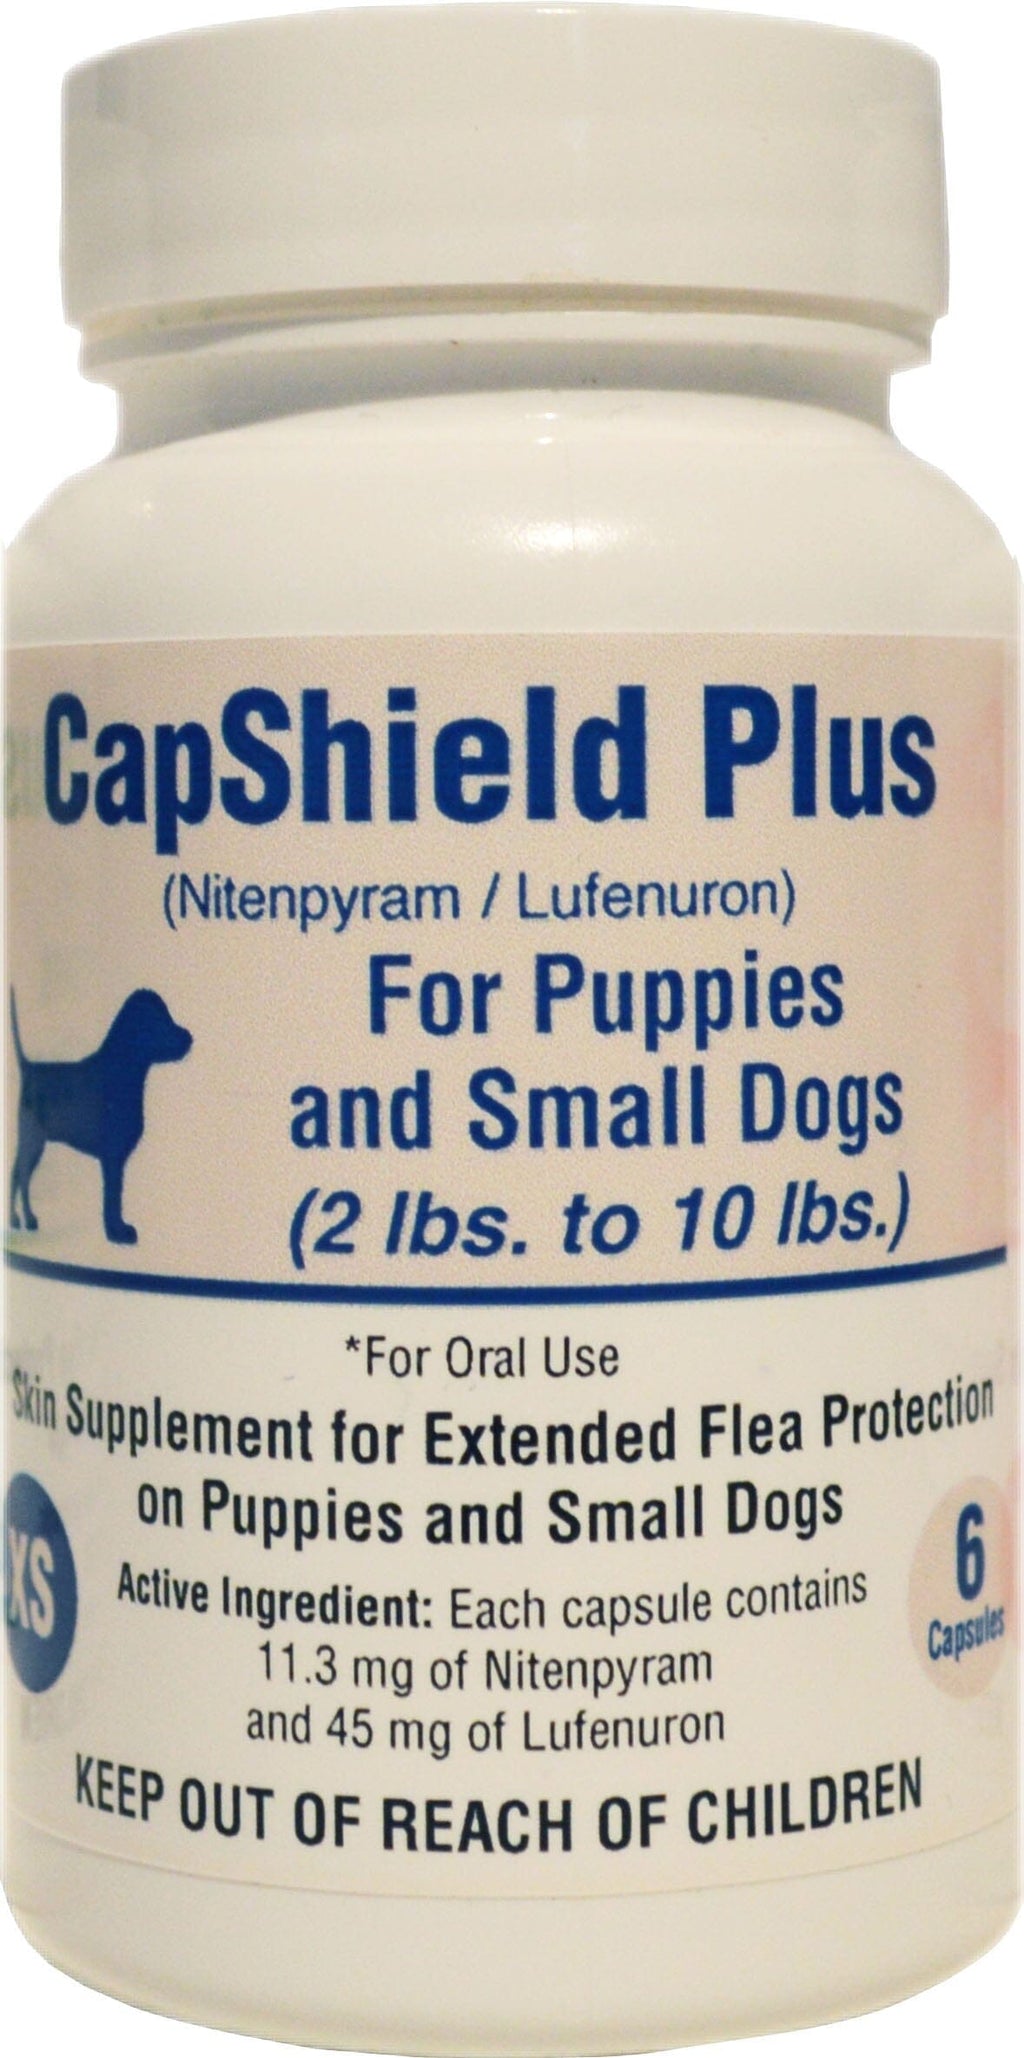 Capshield Plus Flea and Tick Protection Tablets for Dogs - 2 - 10 Lbs - 6 Count  